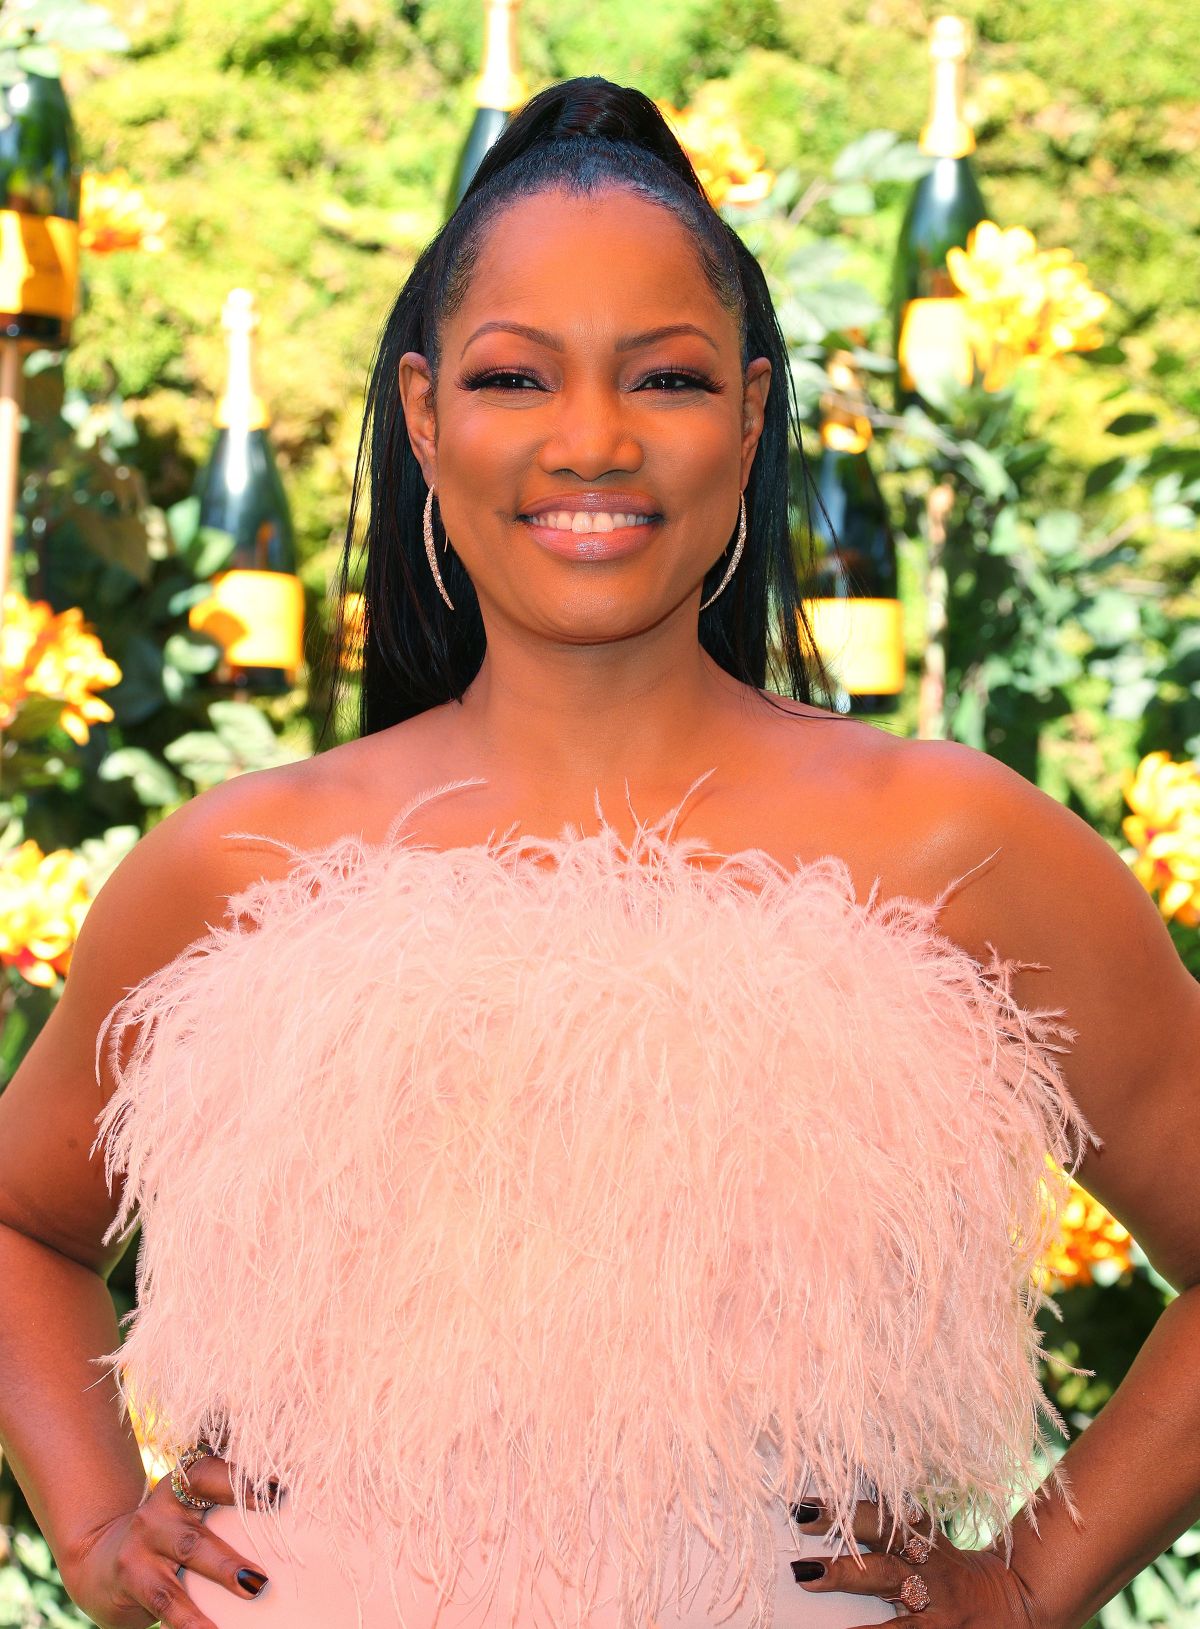 garcelle-beauvais-at-veuve-clicquot-polo-classic-at-will-rogers-state-park-in-los-angeles-10-05-2019-2.jpg